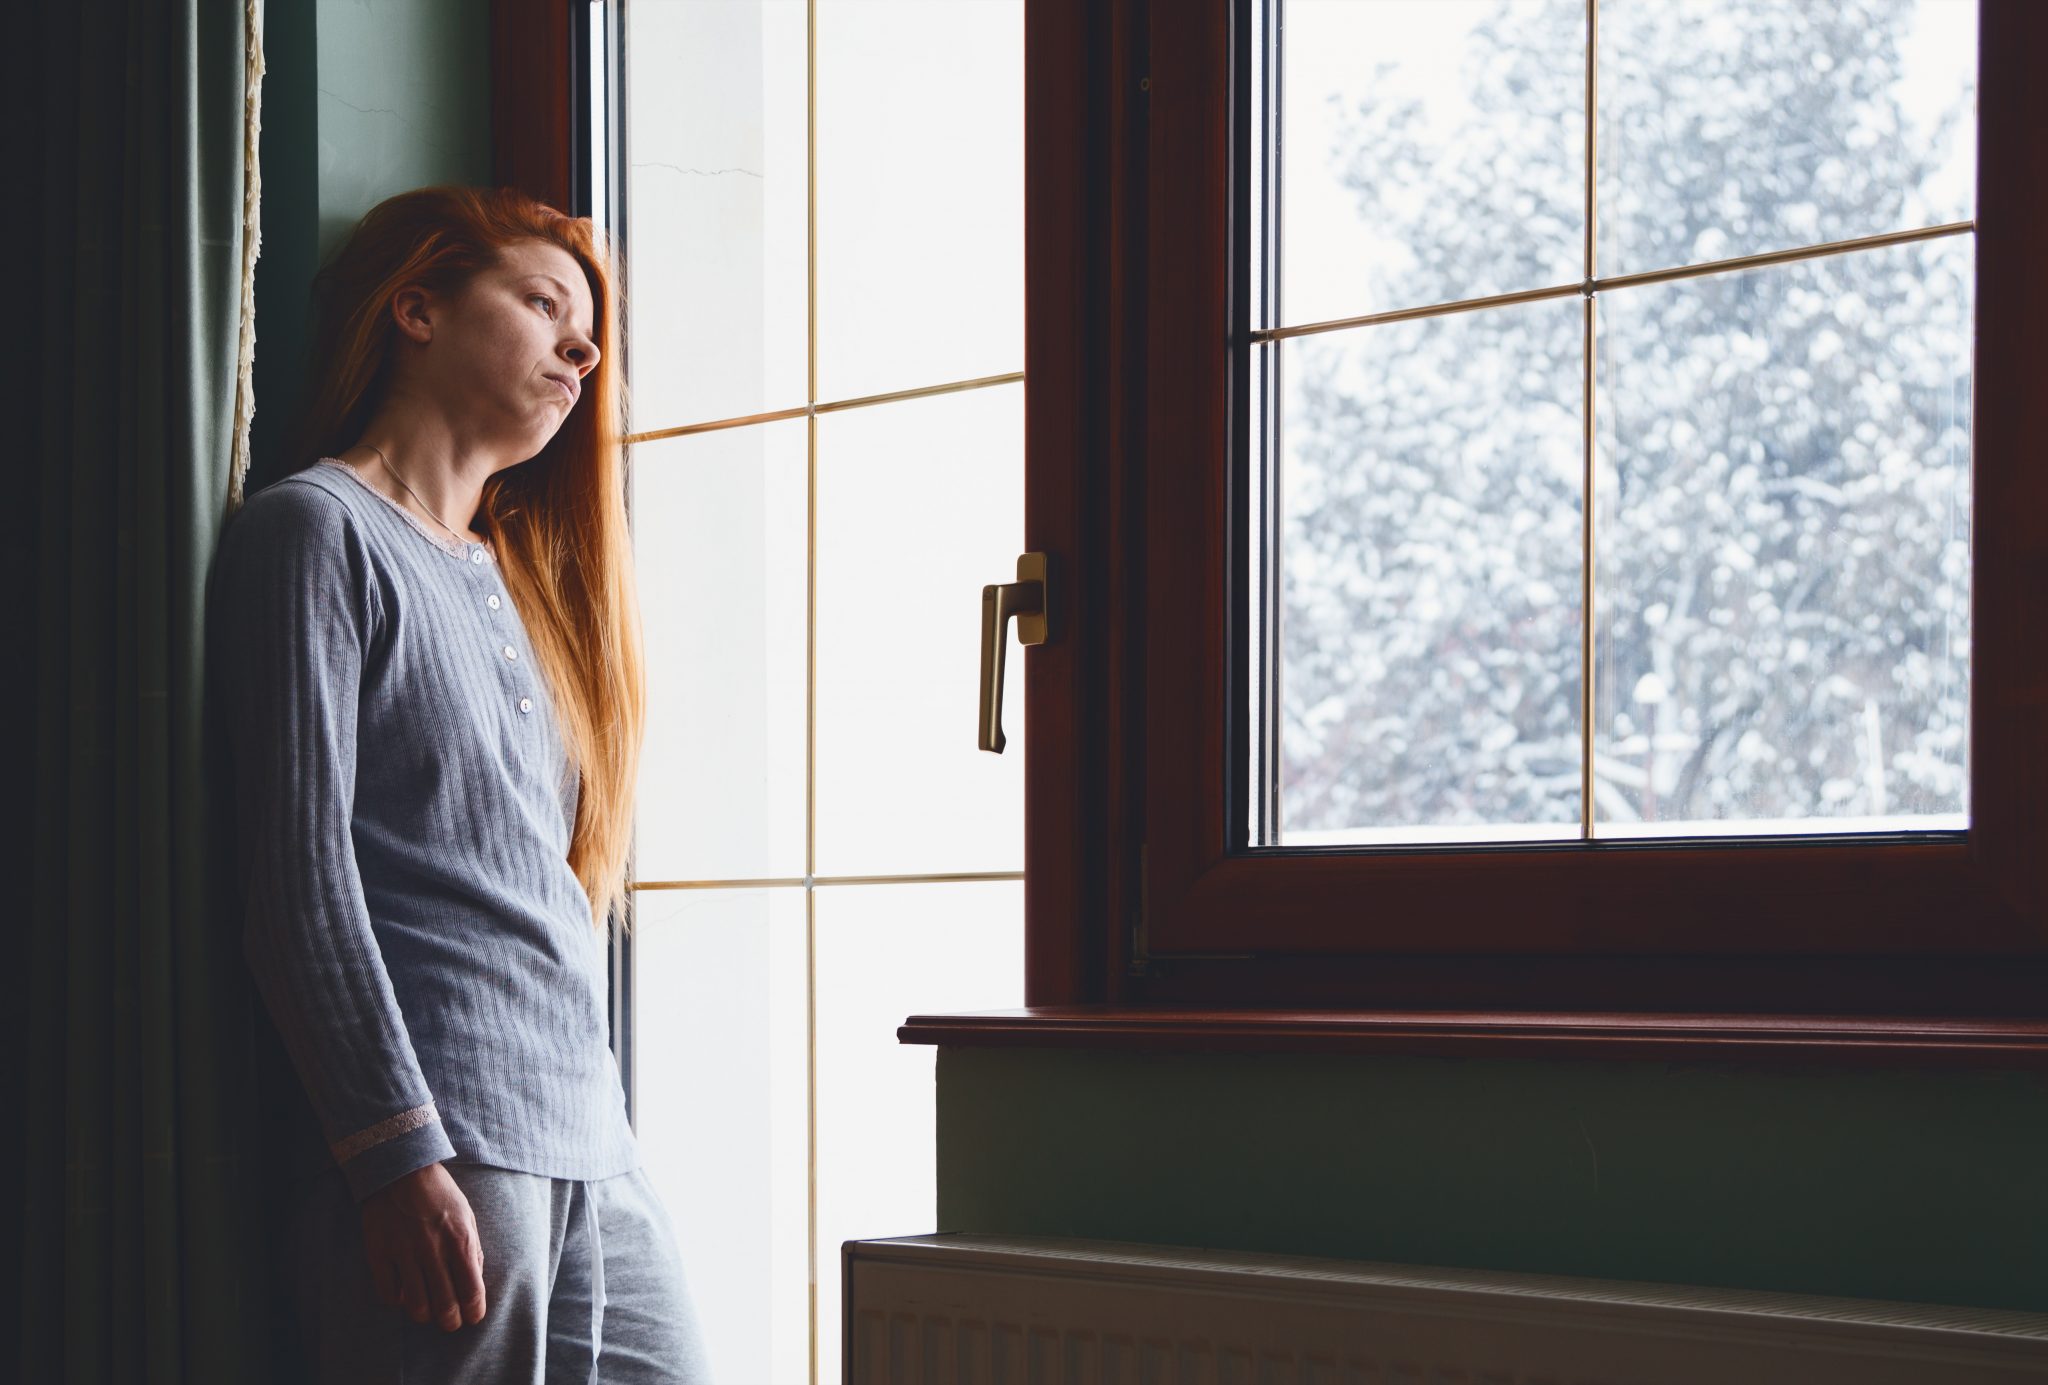 How Acupuncture Helps Seasonal Depressed Mood and the Winter Blues